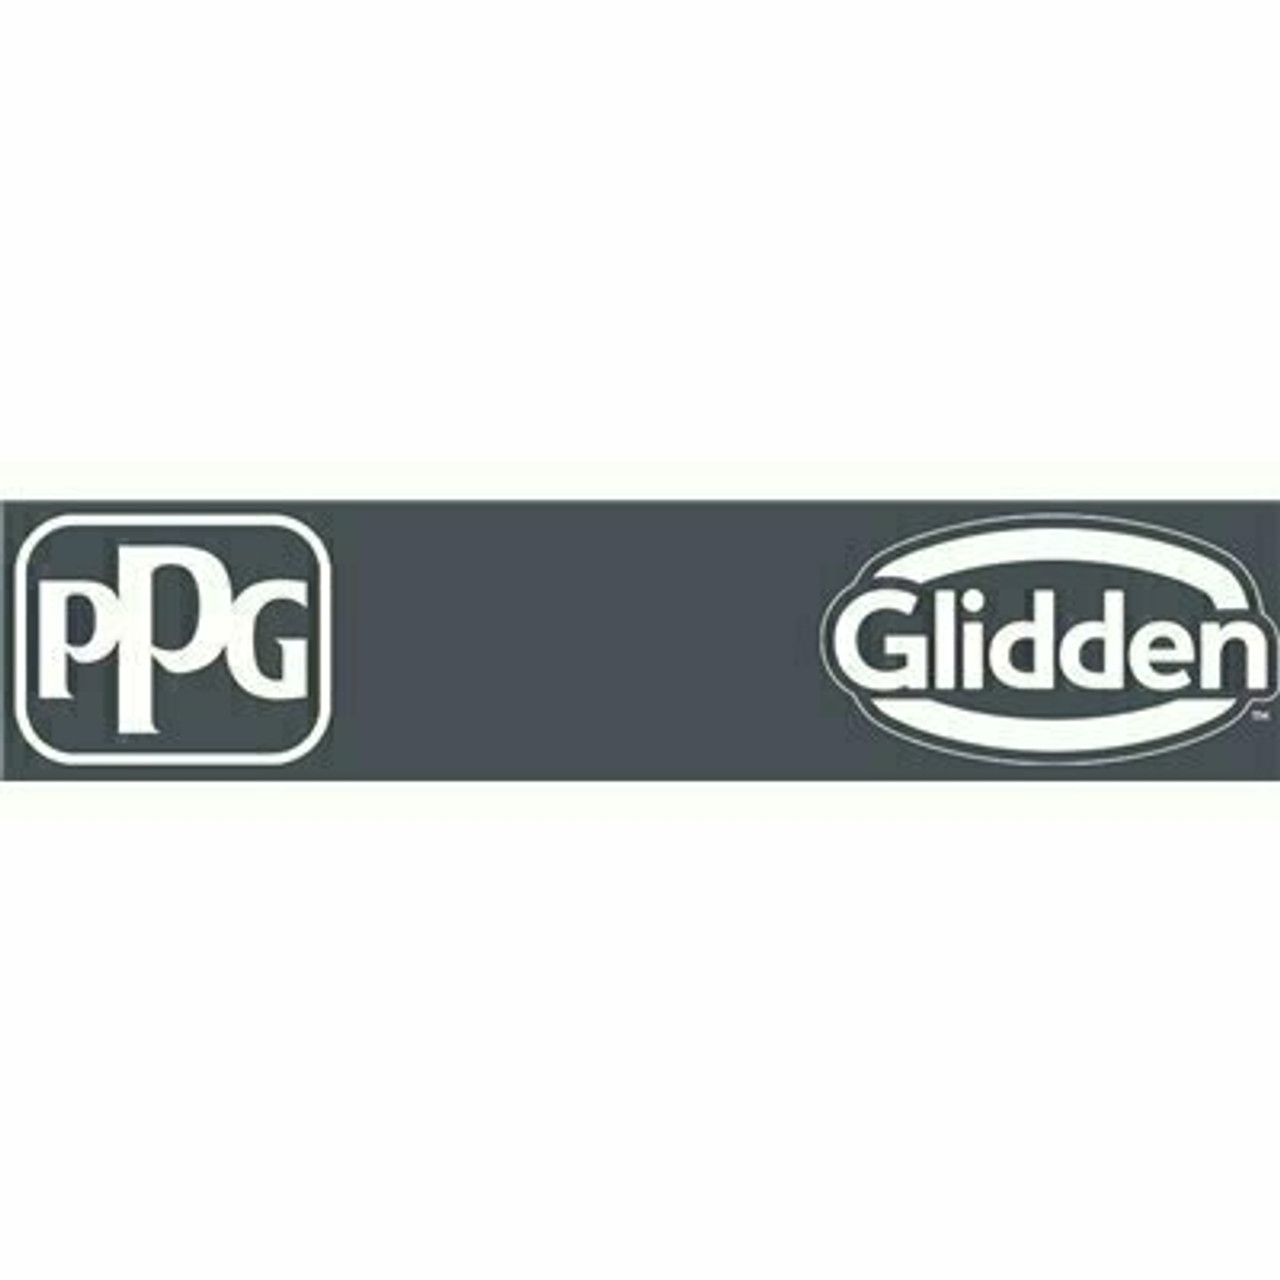 Glidden Diamond 1 Gal. #Ppg1041-7 Cavalry Semi-Gloss Exterior One-Coat Paint With Primer